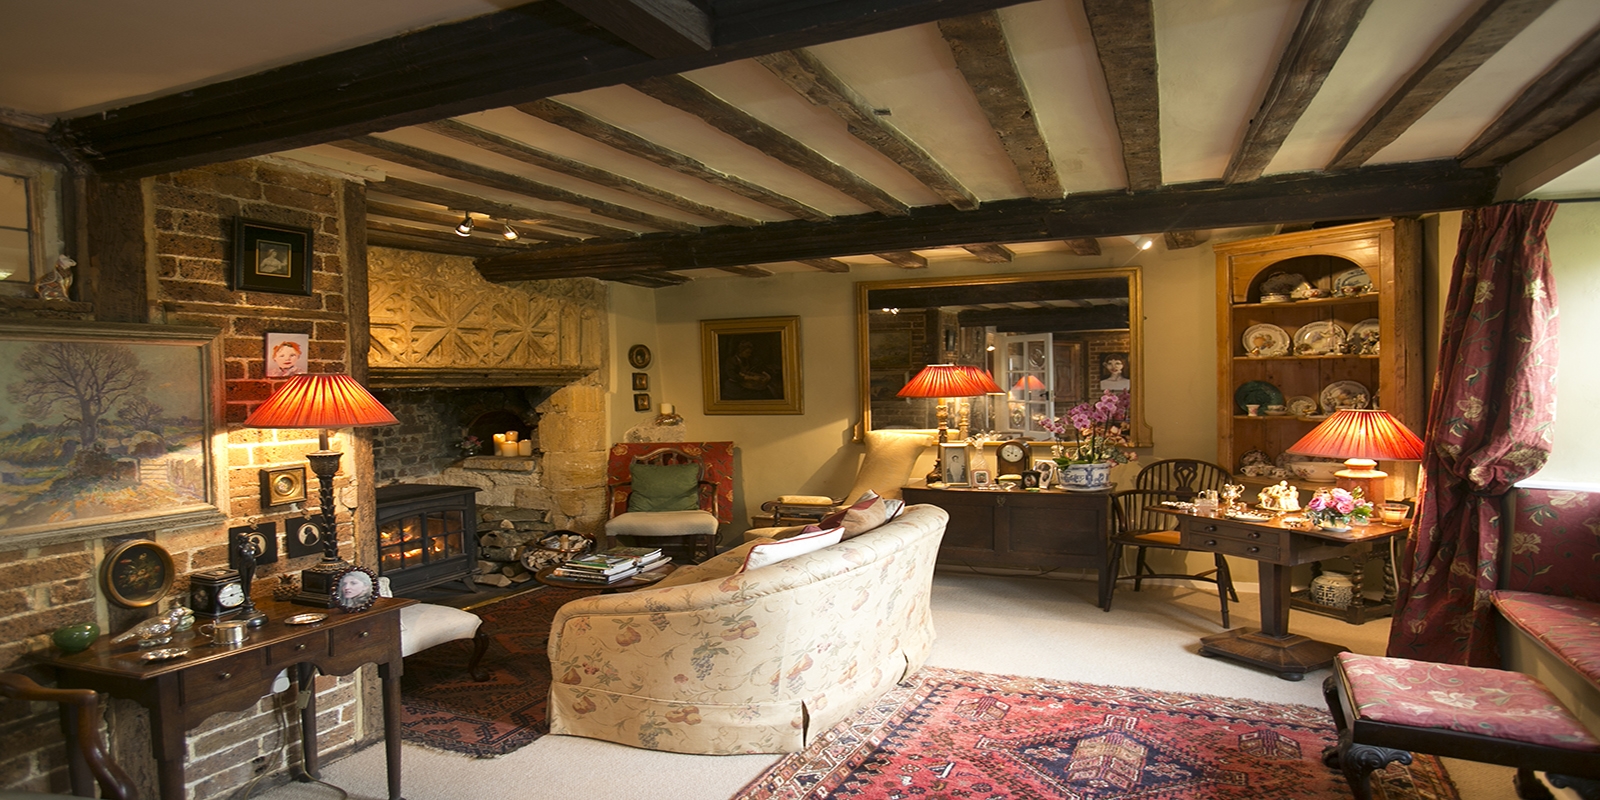 Relax in comfort at Tudor Cottage